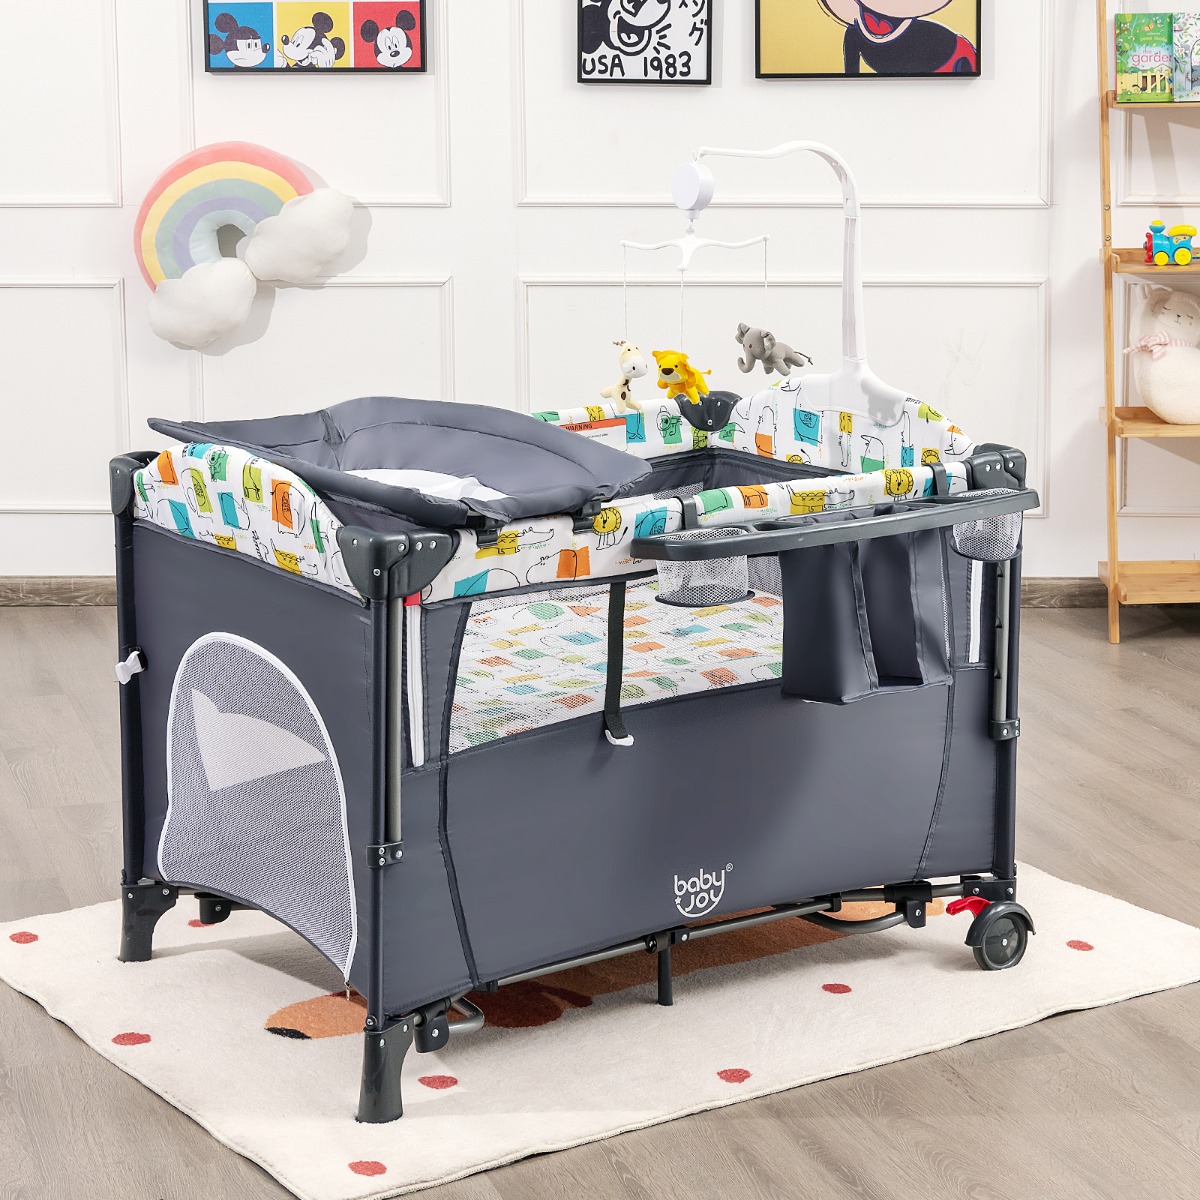 5-in-1 Adjustable Bedside Baby Crib with Changing Table